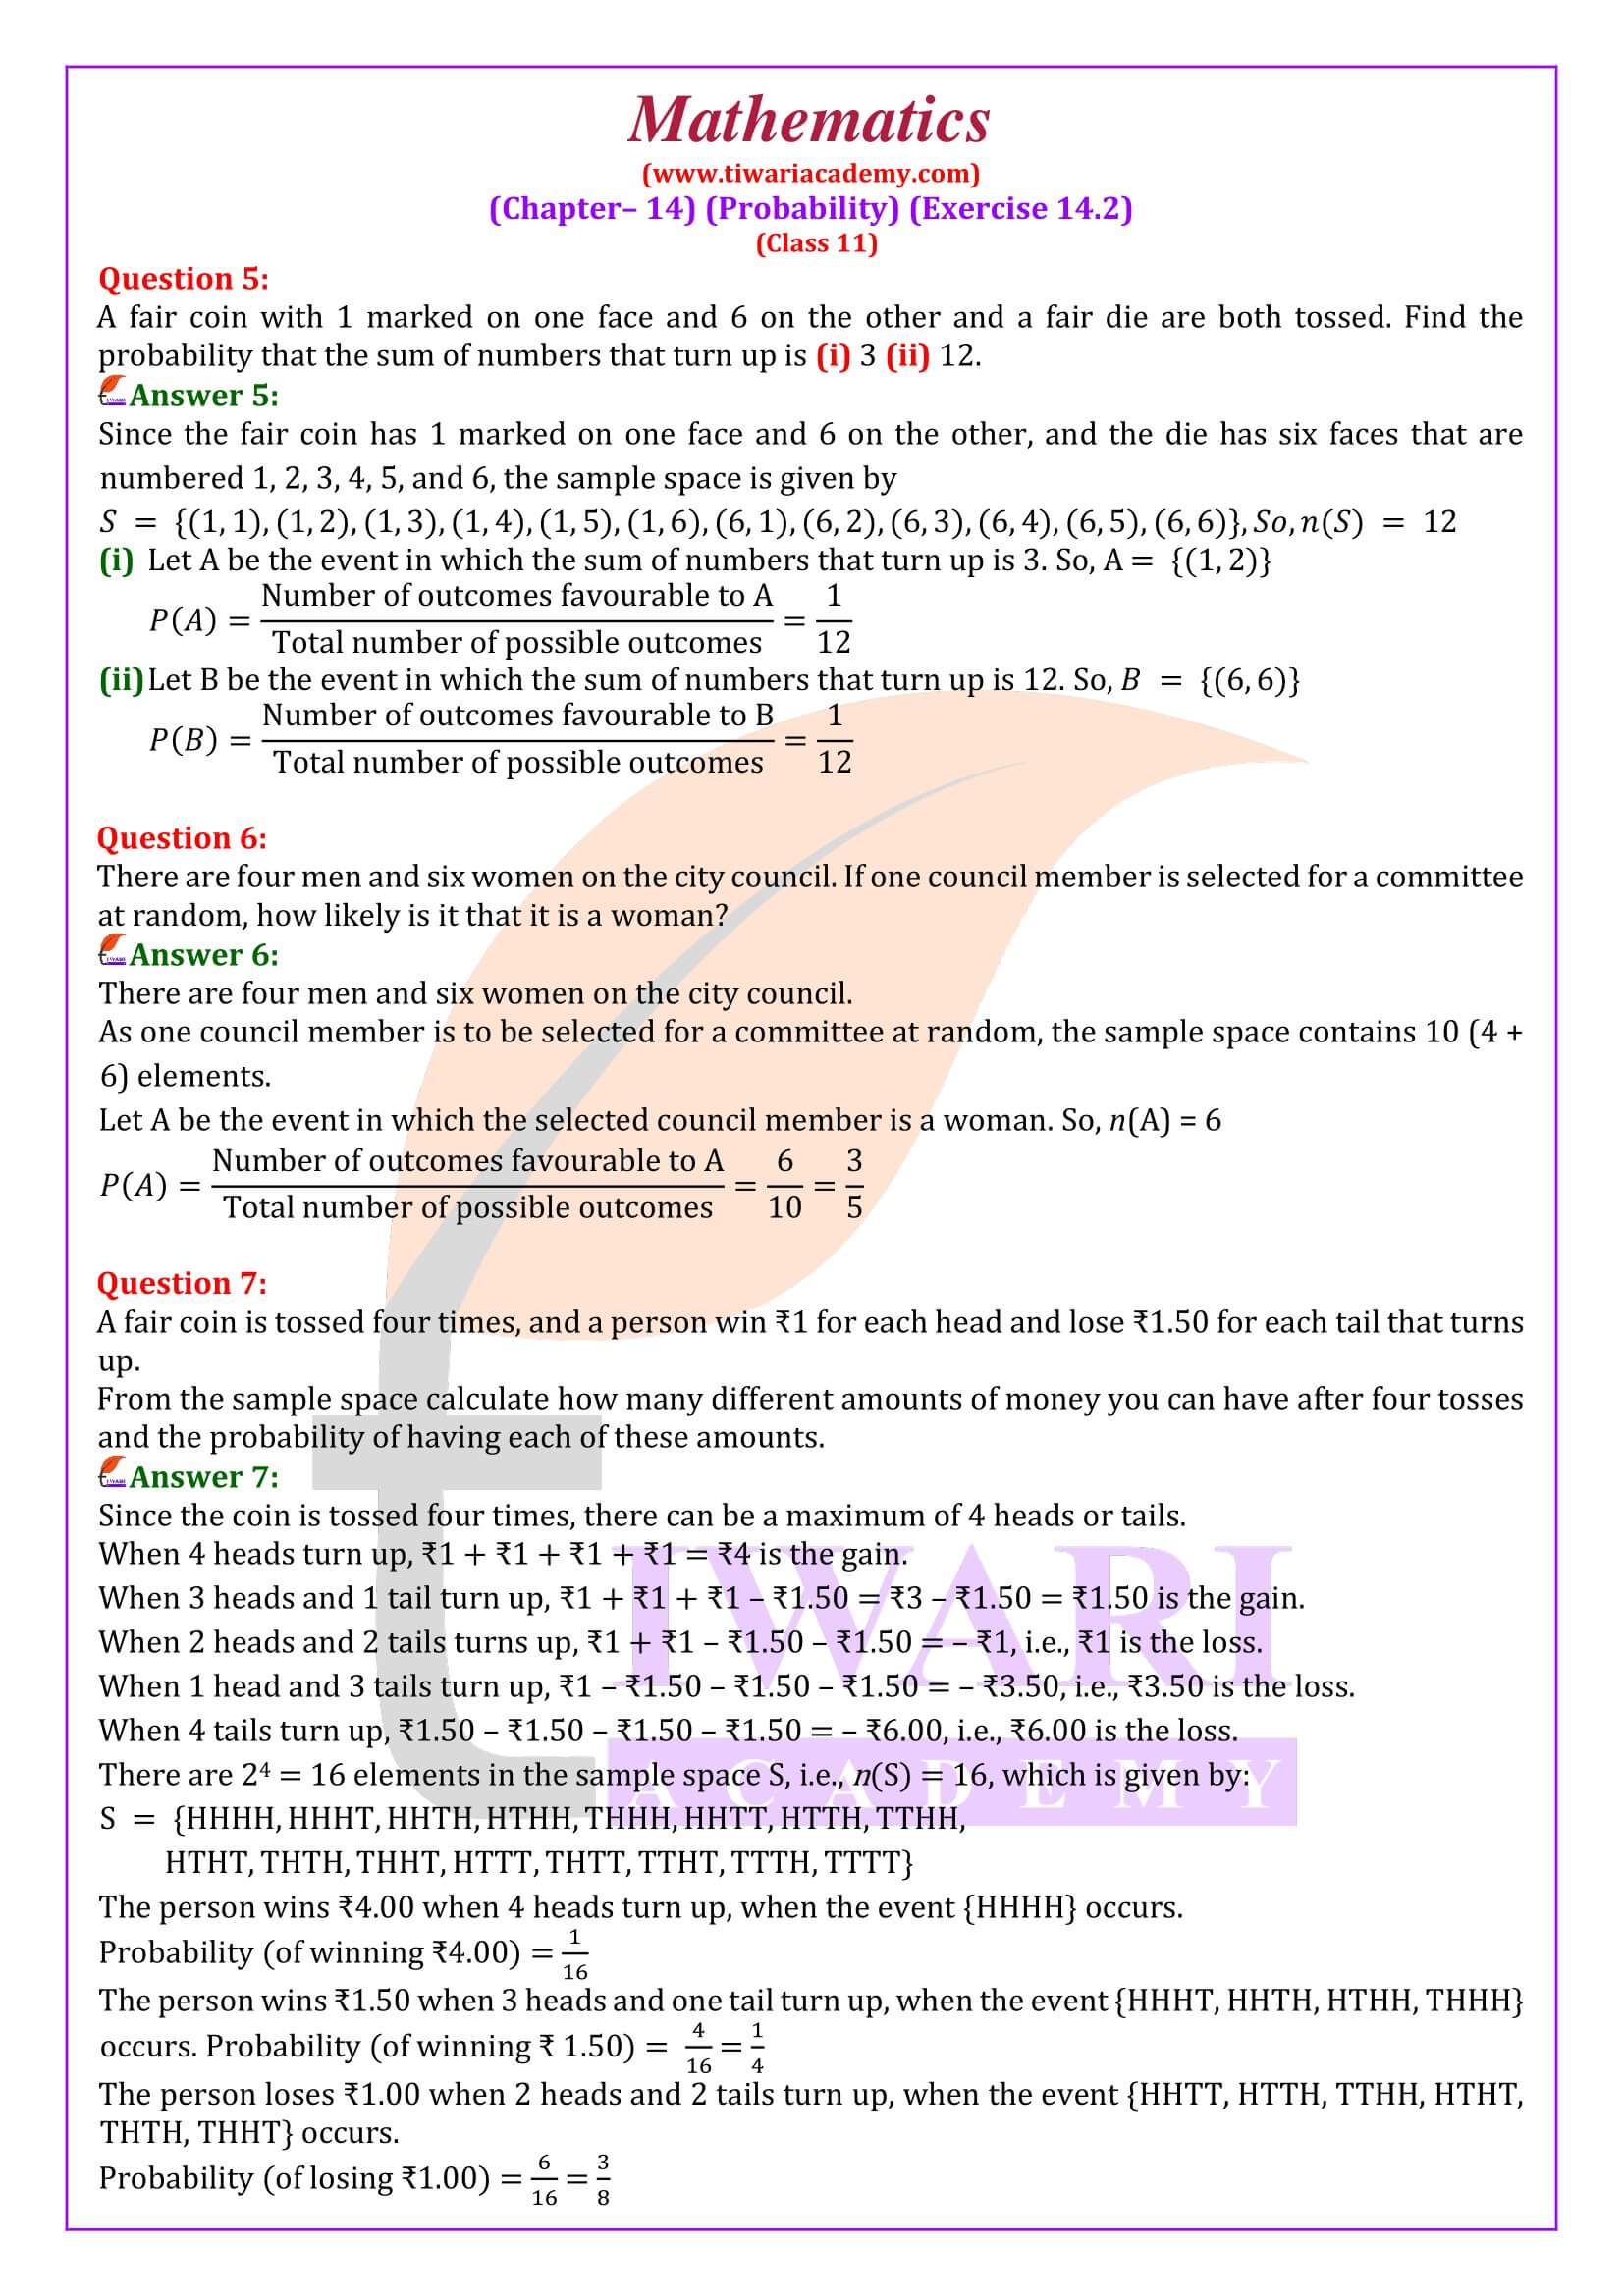 NCERT Solutions for Class 11 Maths Chapter 14 Exercise 14.2 of Rationalised books